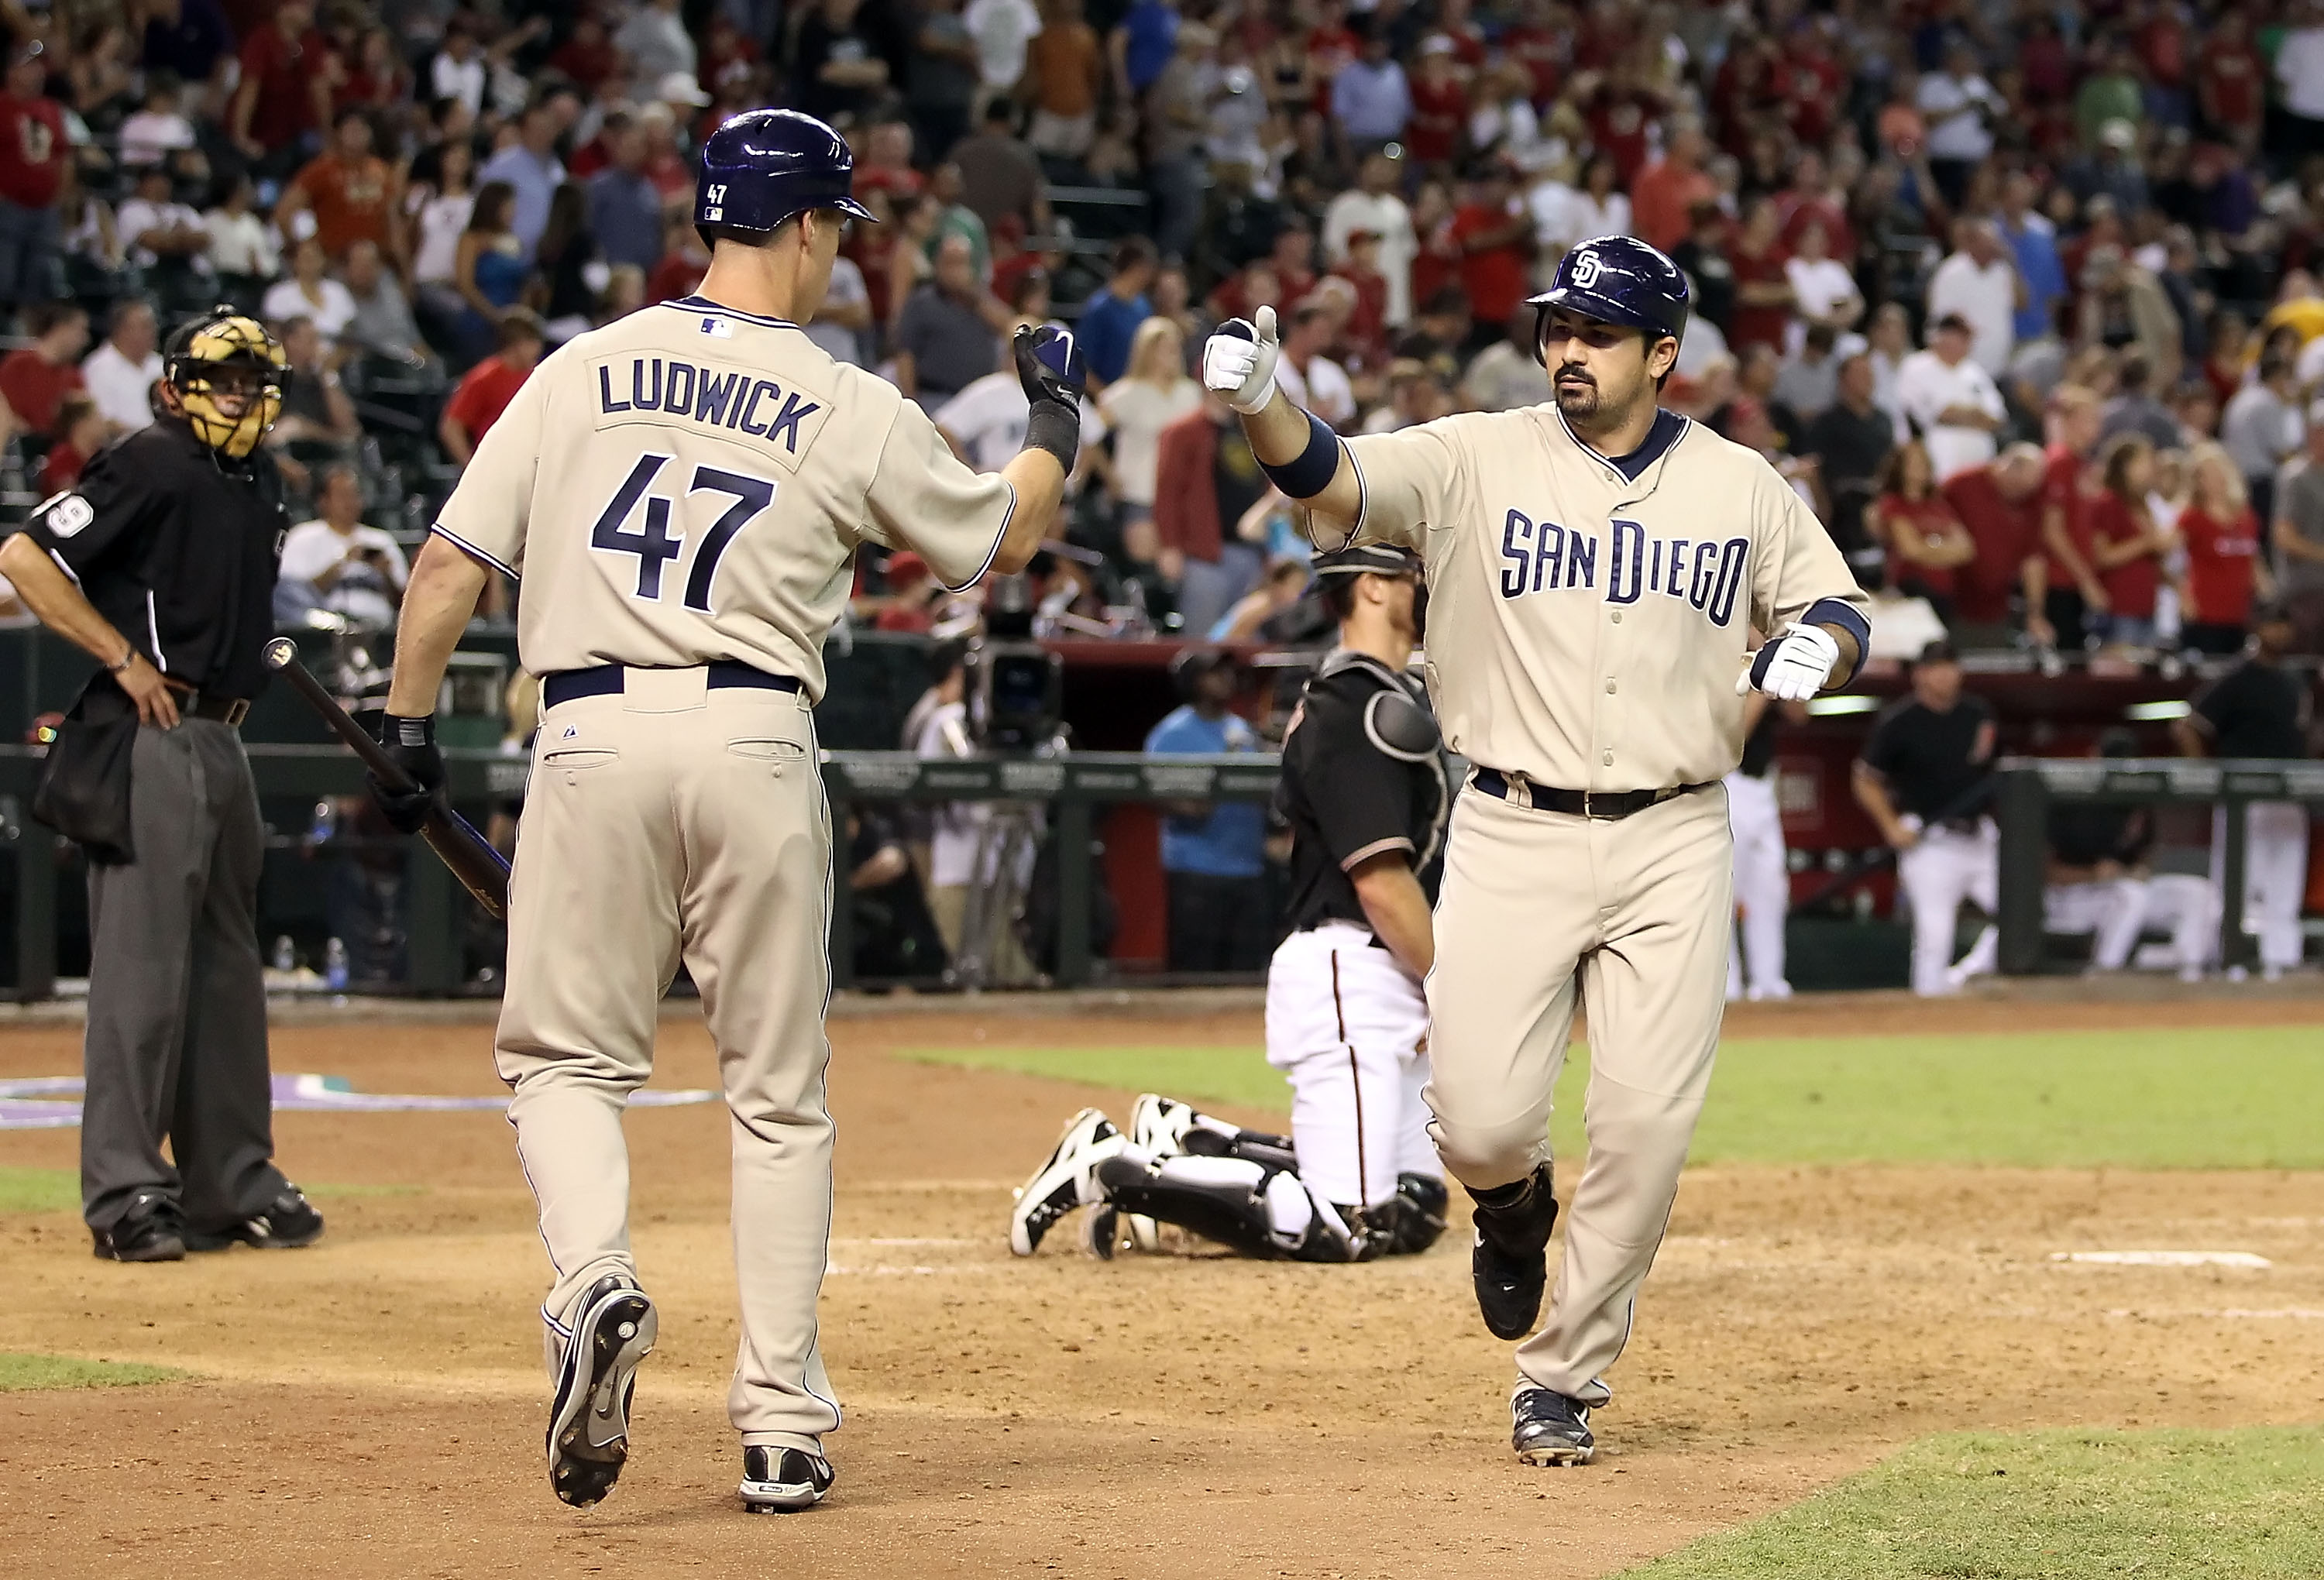 PHOENIX - AUGUST 07:  Adrian Gonzalez #23 of the San Diego Padres celebrates with teammate Ryan Ludwick #47 after Gonzalez hit a solo home run against the Arizona Diamondbacks during the ninth inning of the Major League Baseball game at Chase Field on Aug